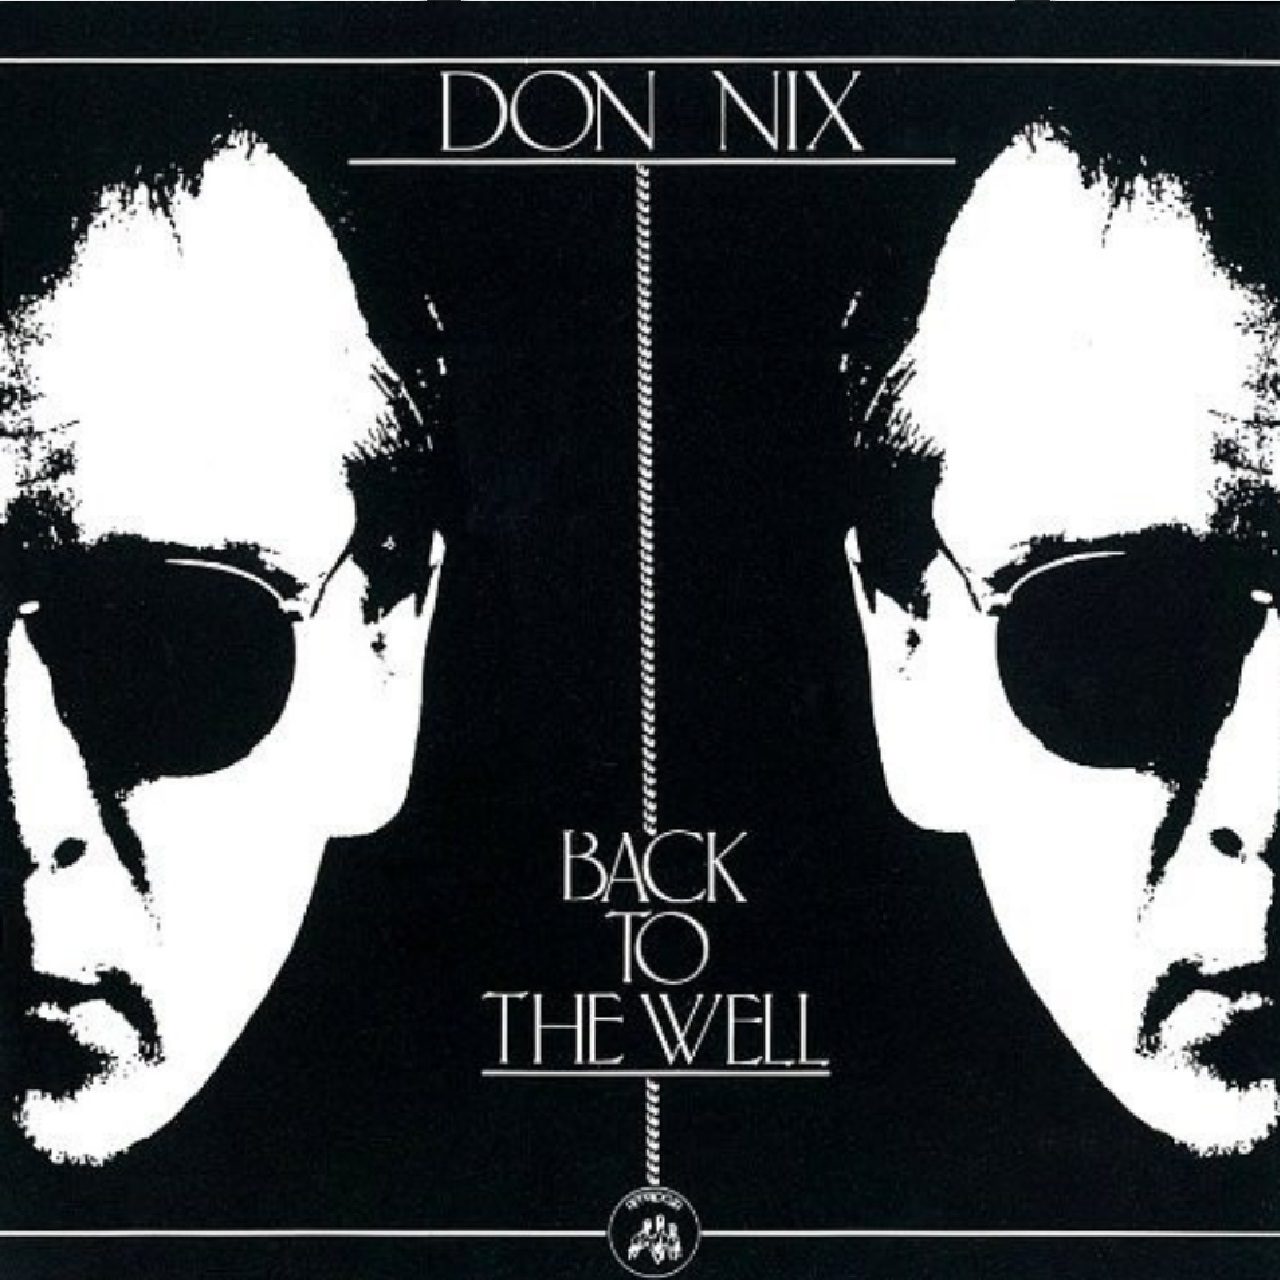 Don Nix – Back To The Well cover album